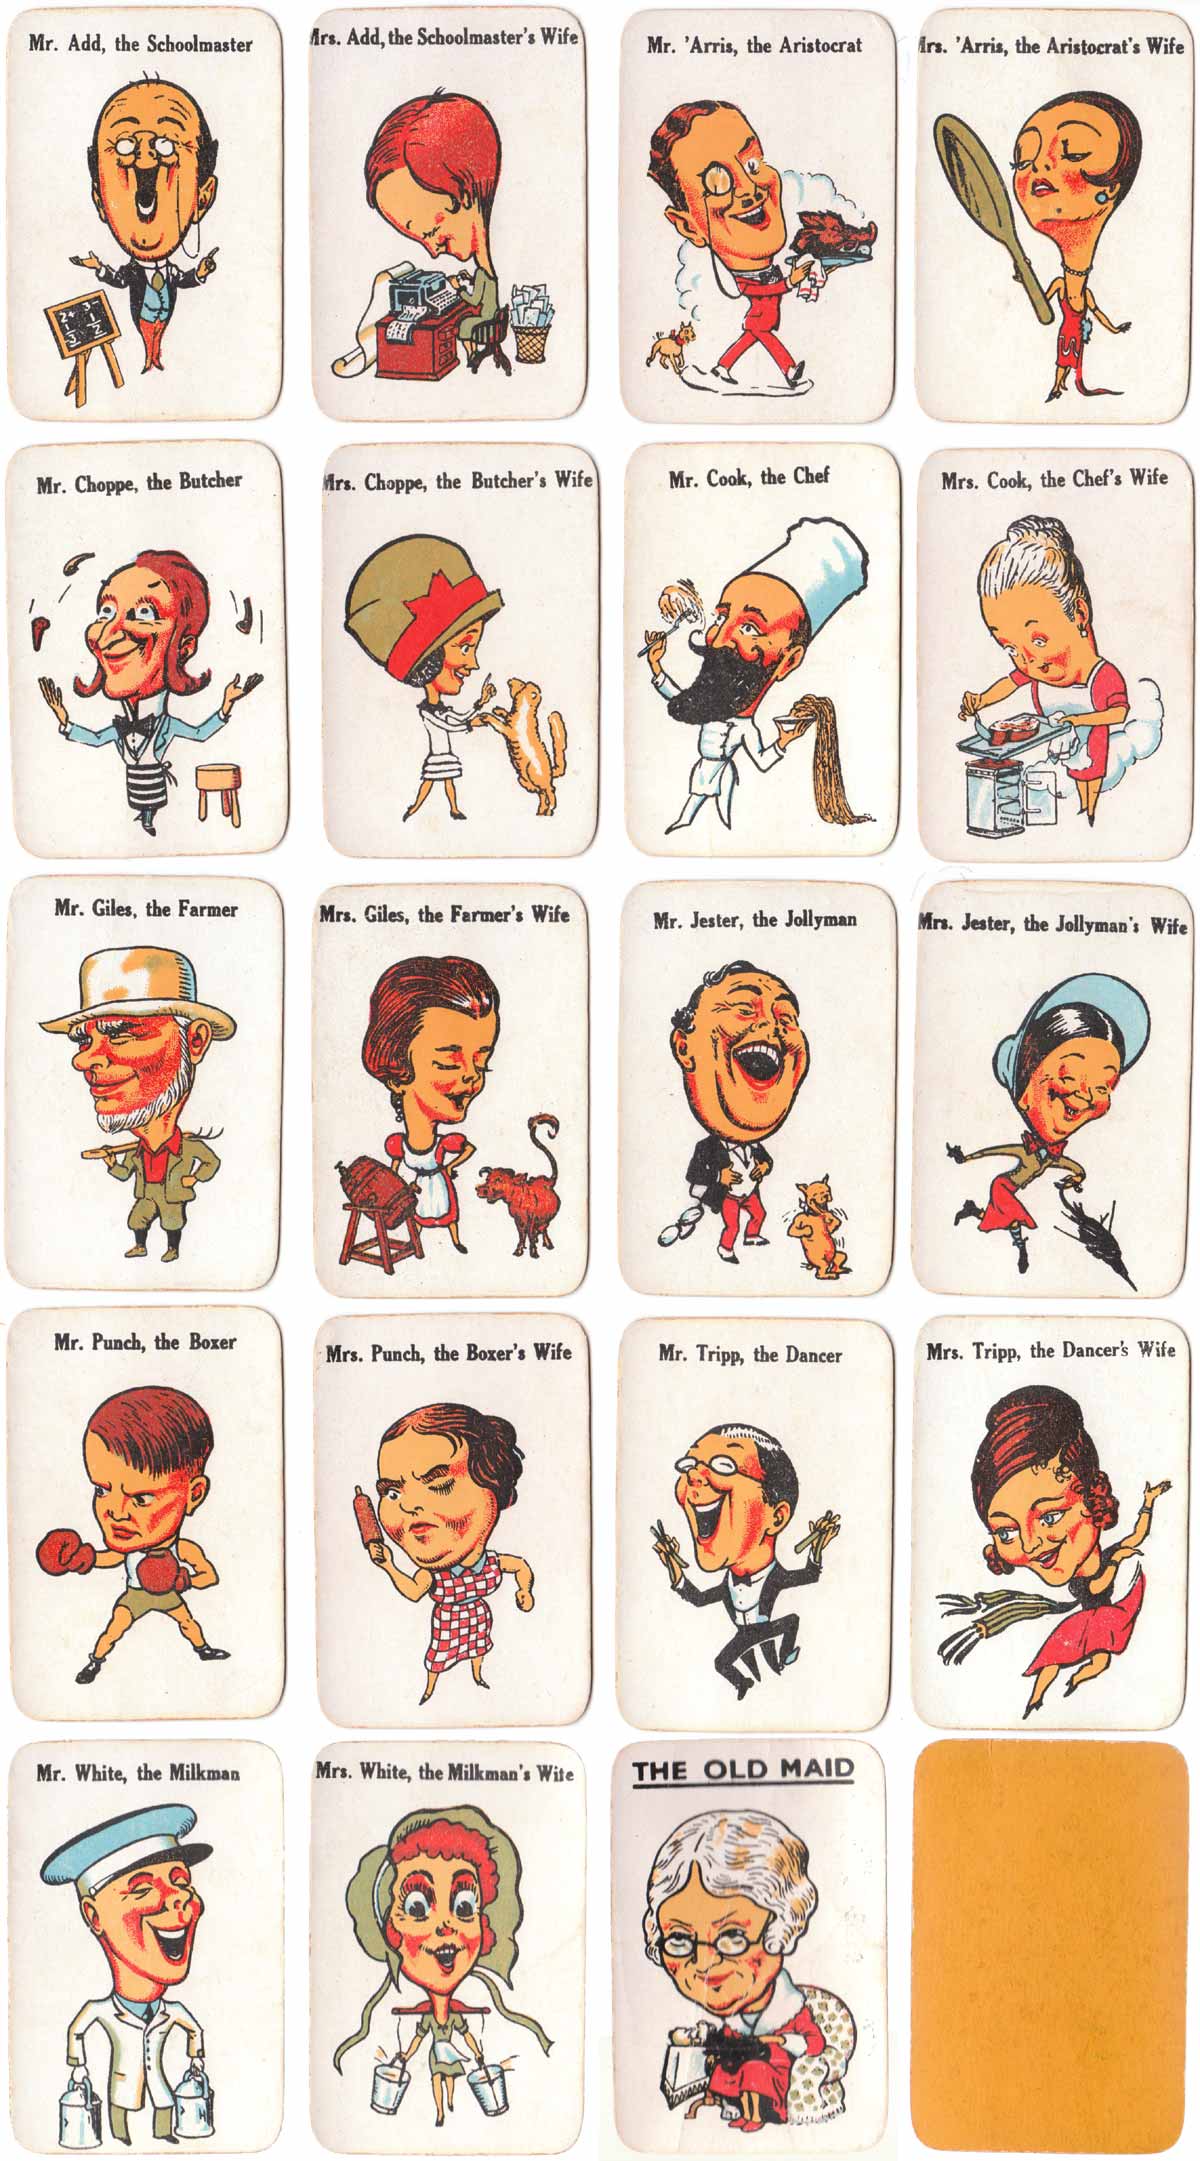 “The Game of Old Maid” by the Chad Valley Games Co., c.1930s